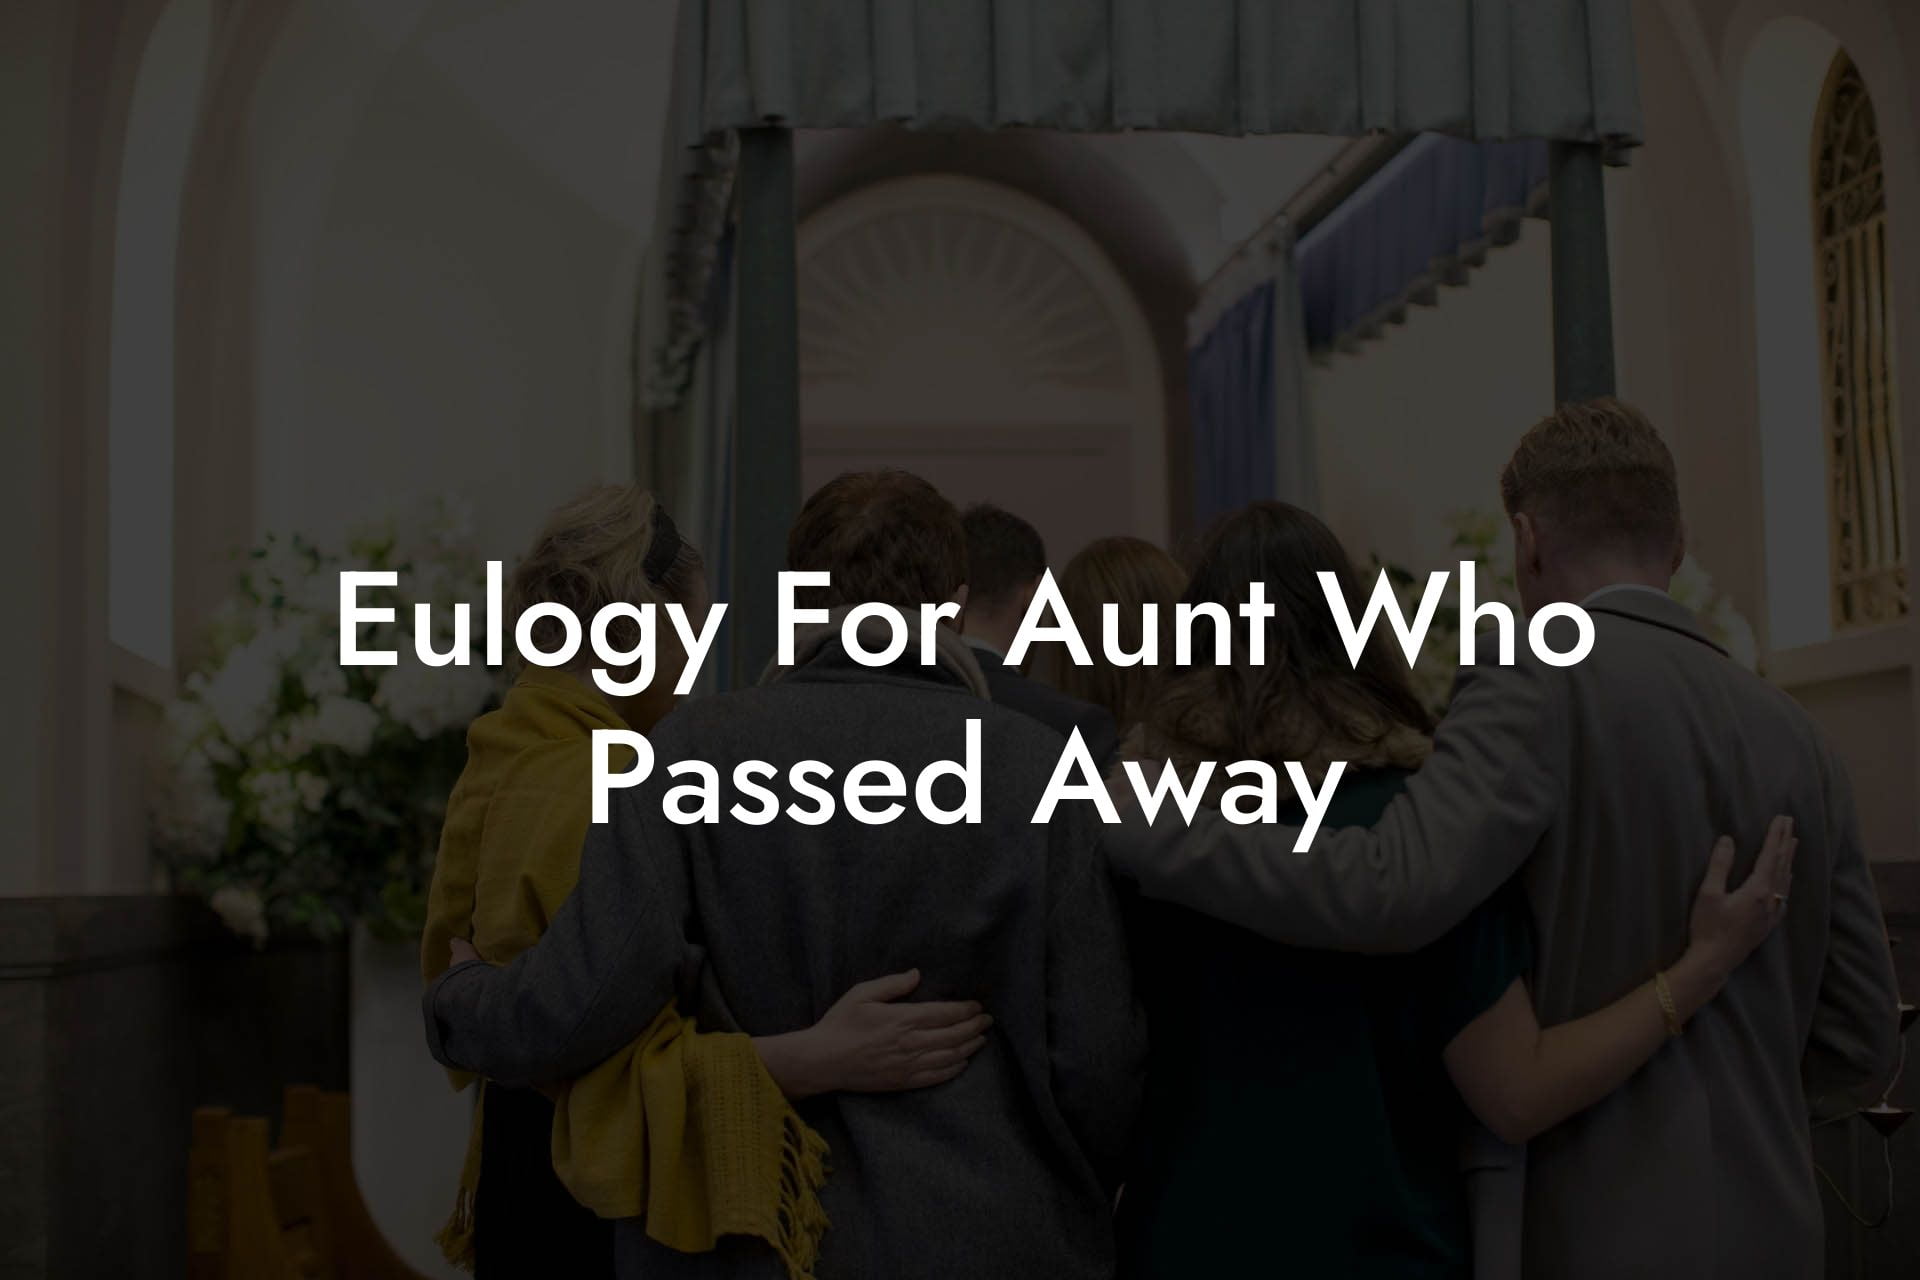 Eulogy For Aunt Who Passed Away